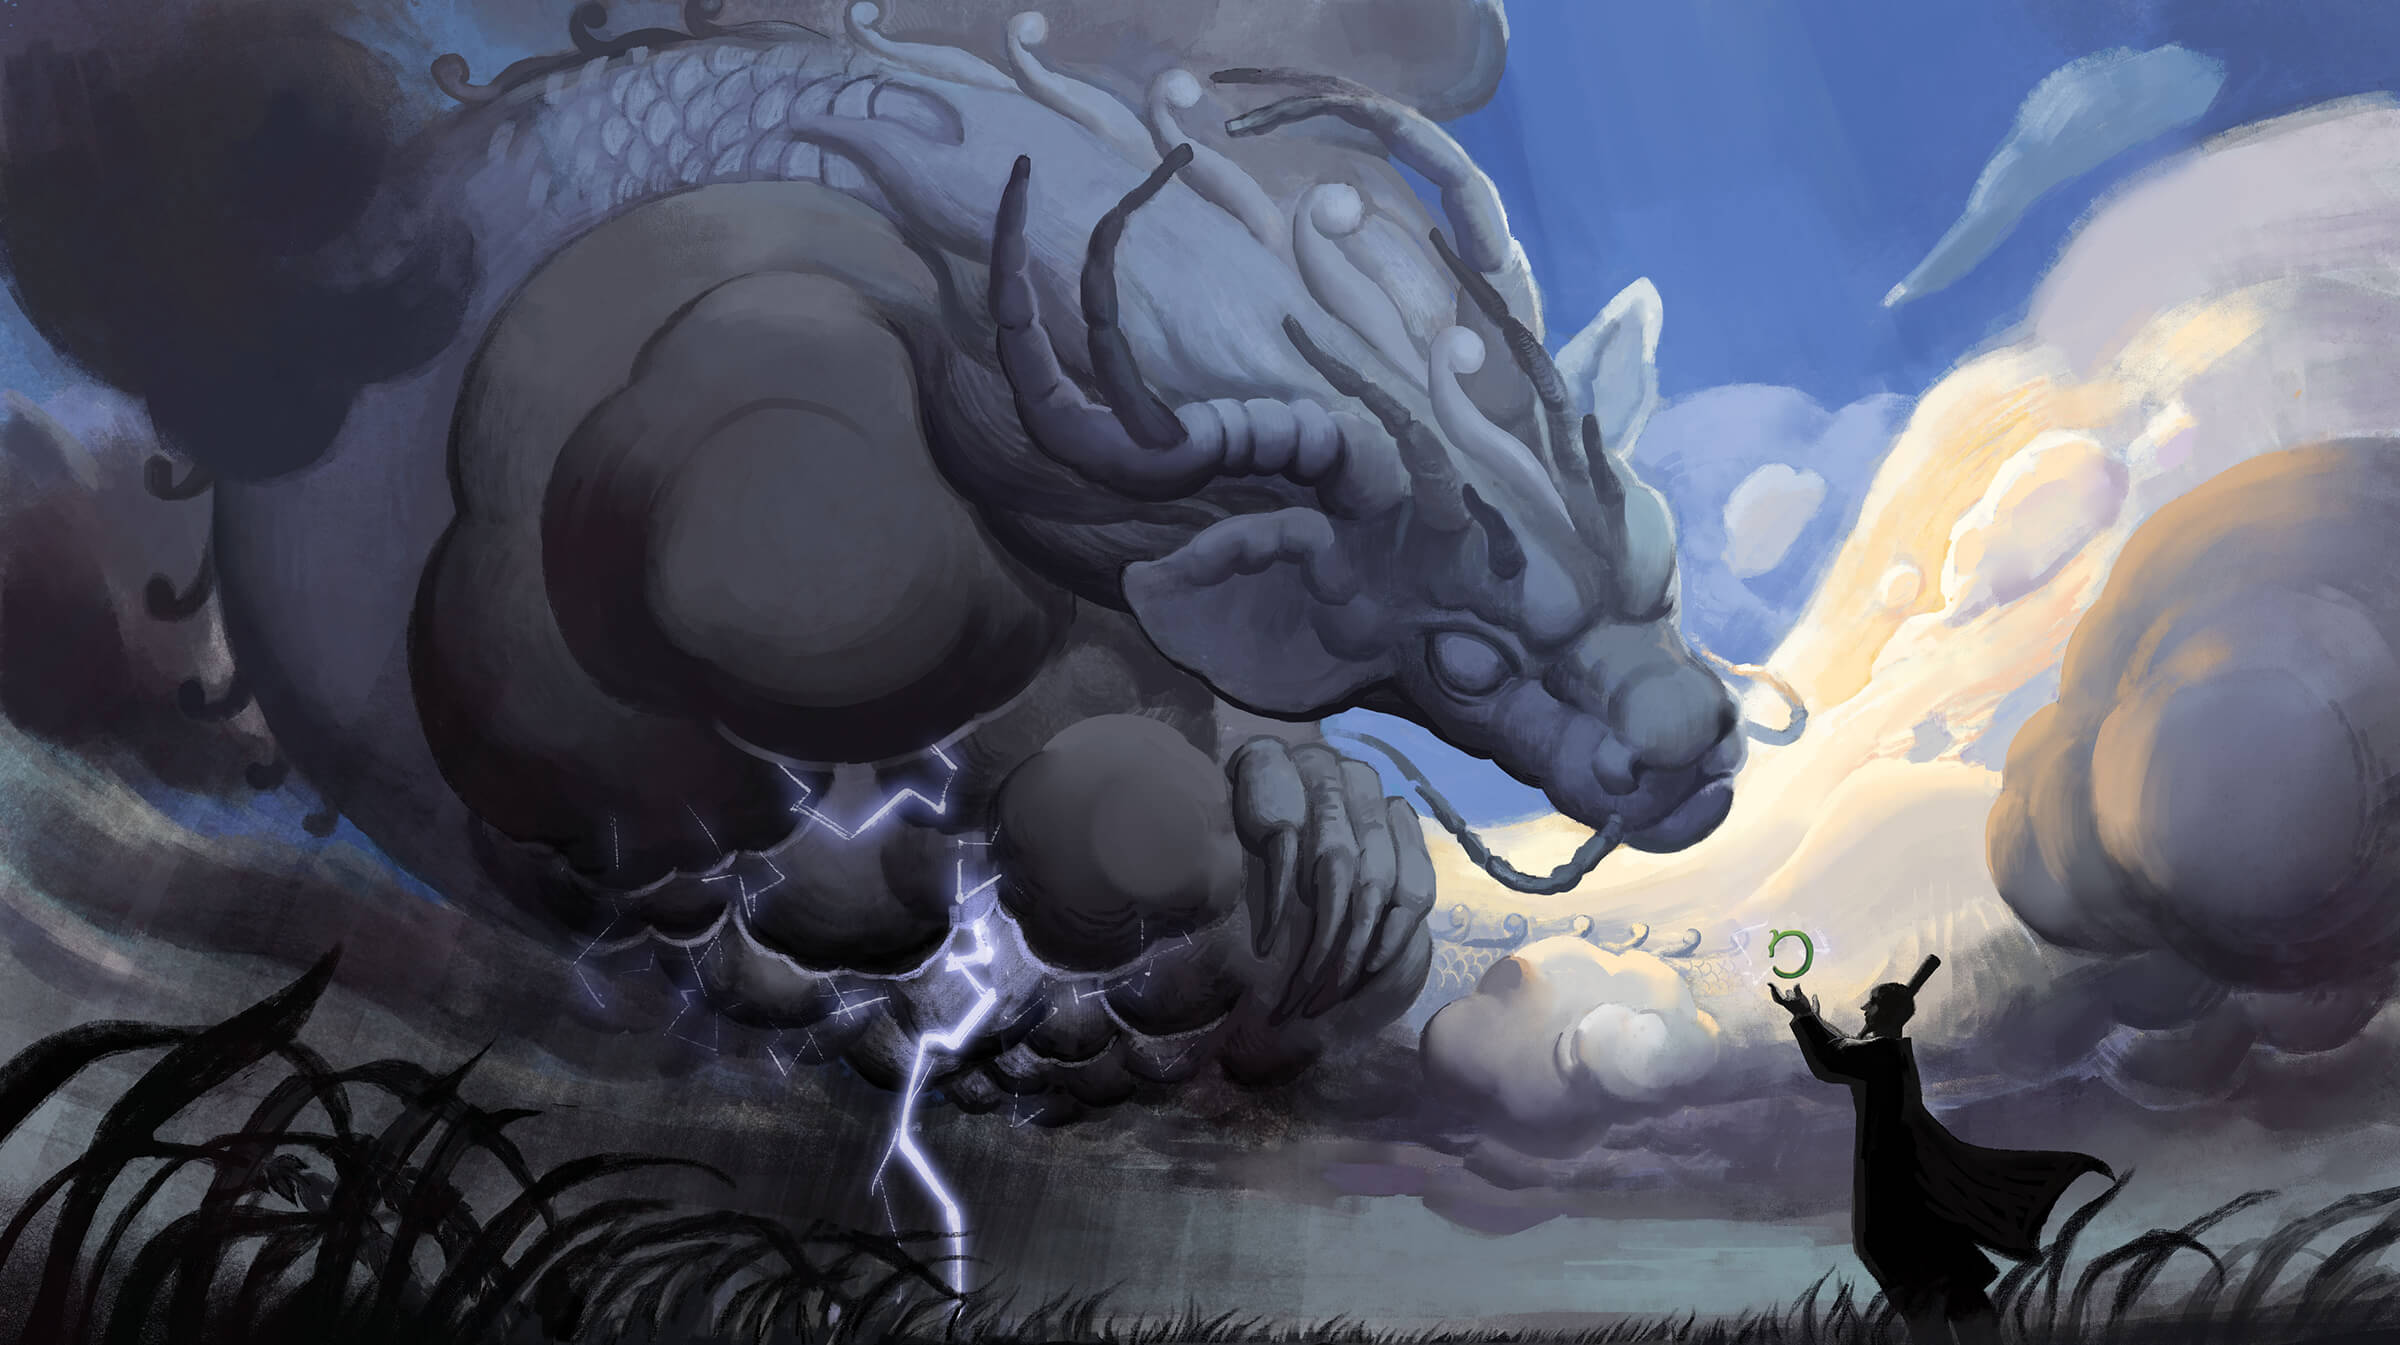 digital painting of an asian man confronting an enormous dragon made of clouds and generating lightning